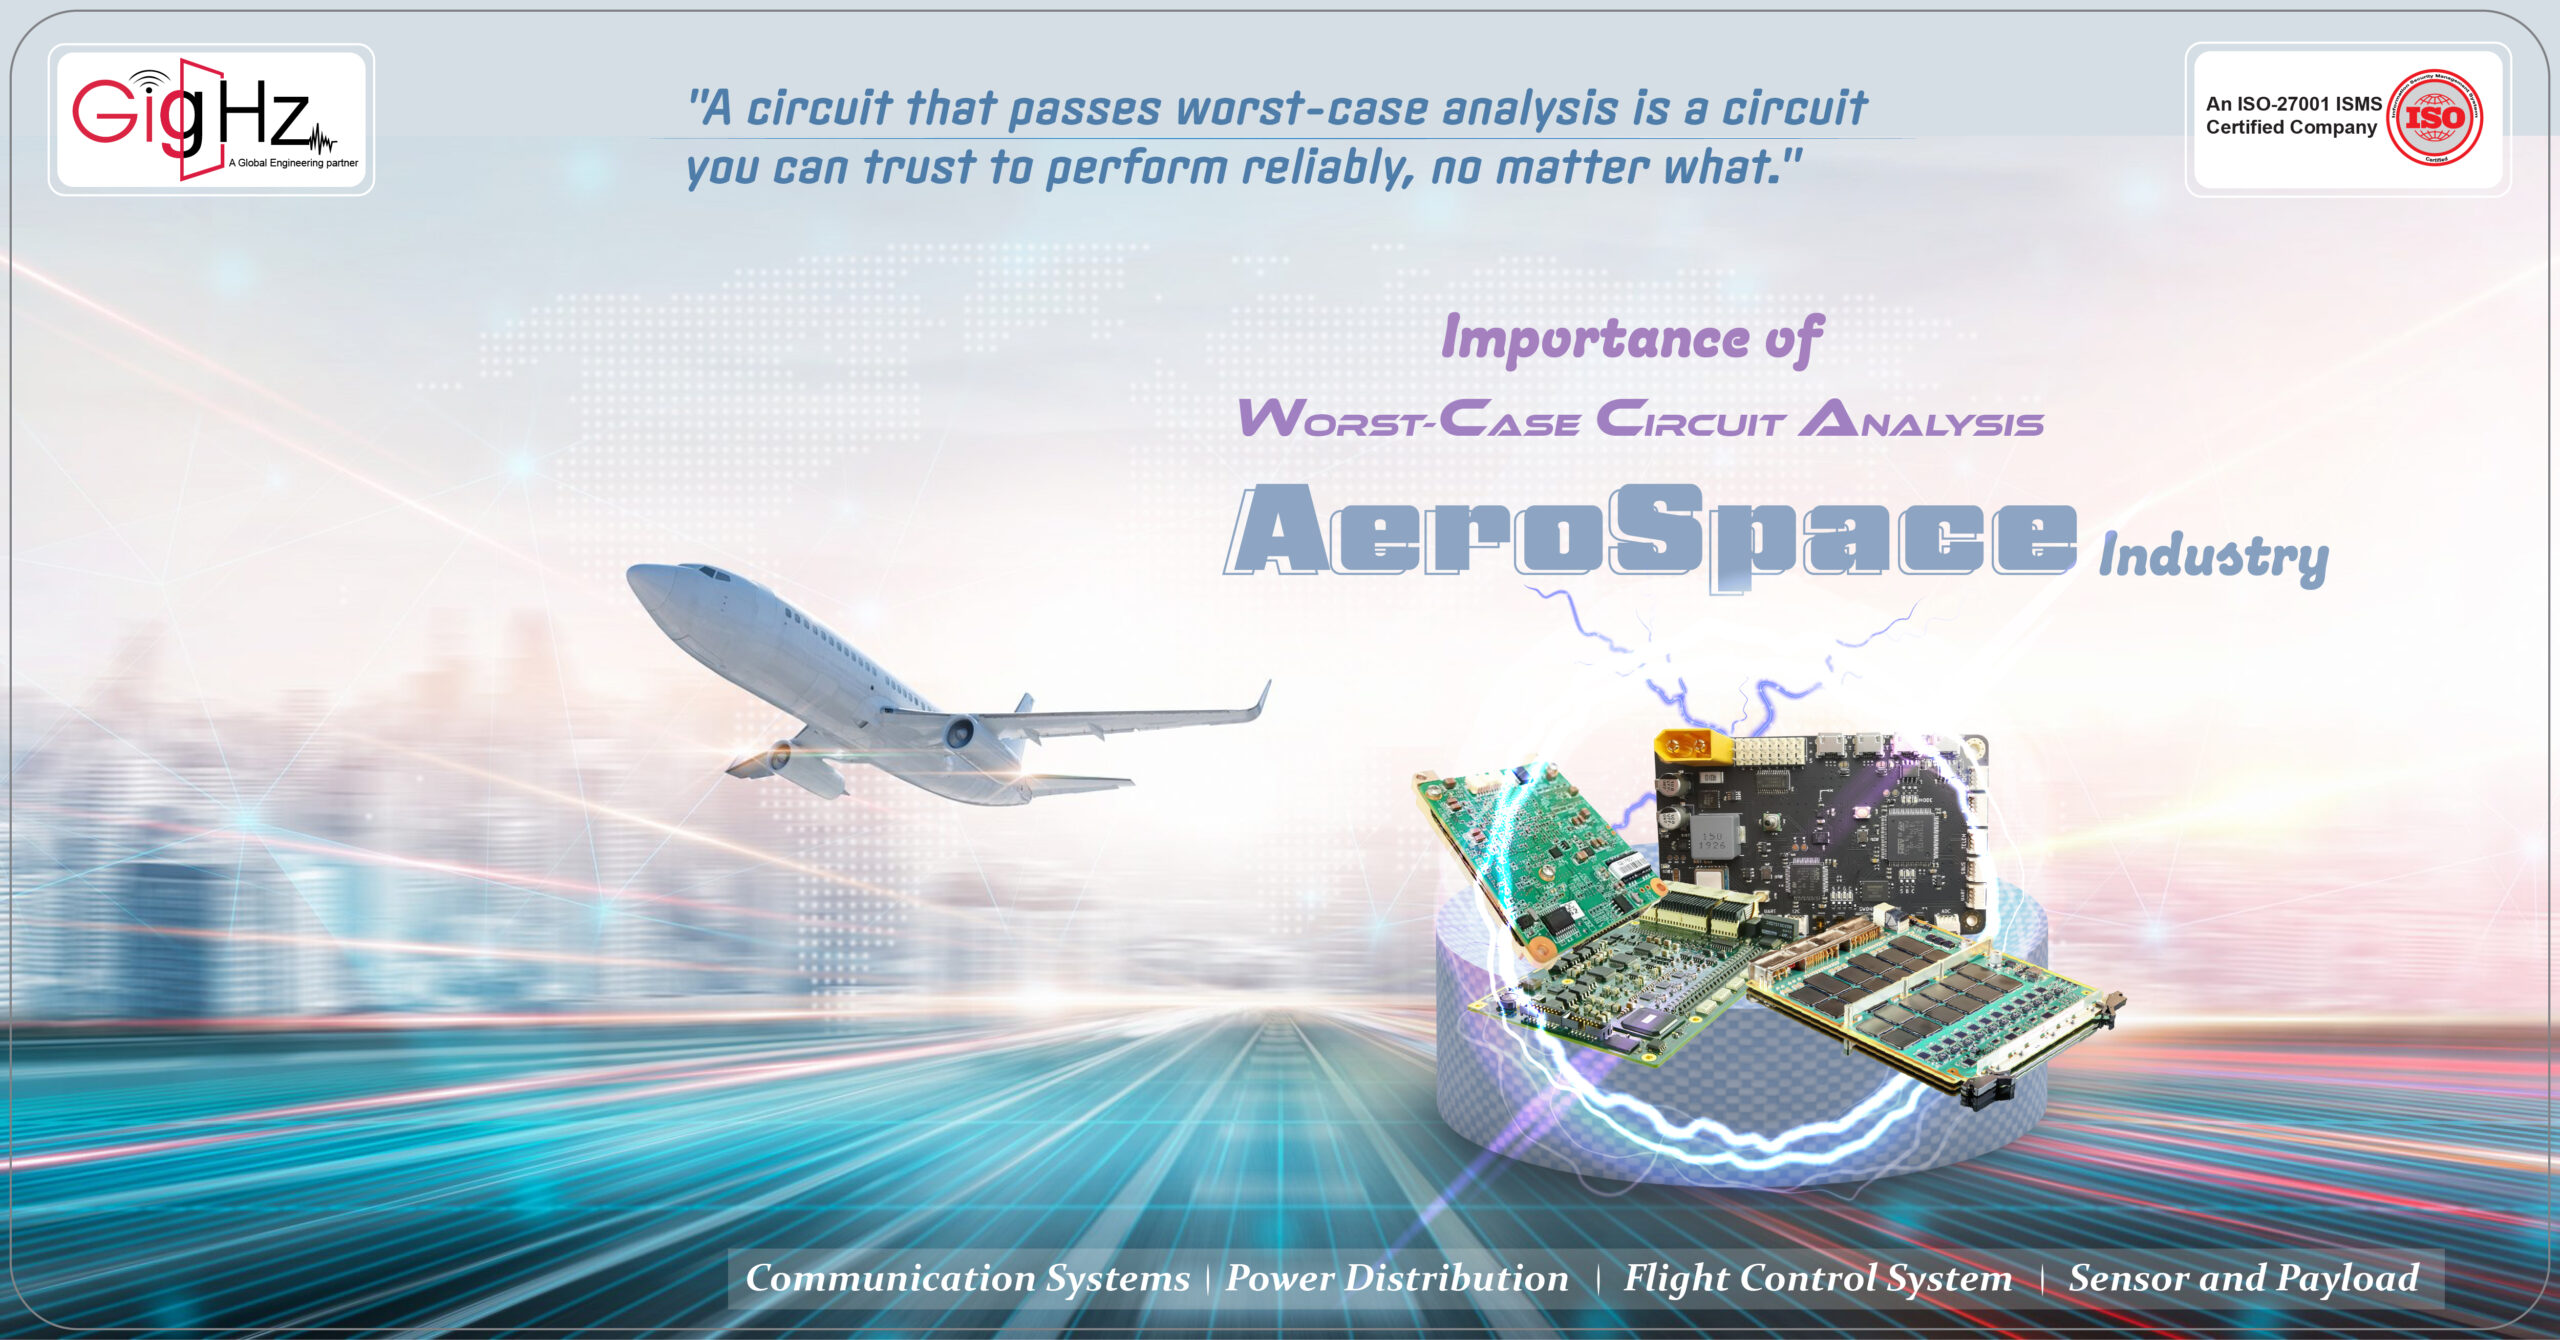 Importance of worst-case circuit analysis in Aerospace Industry